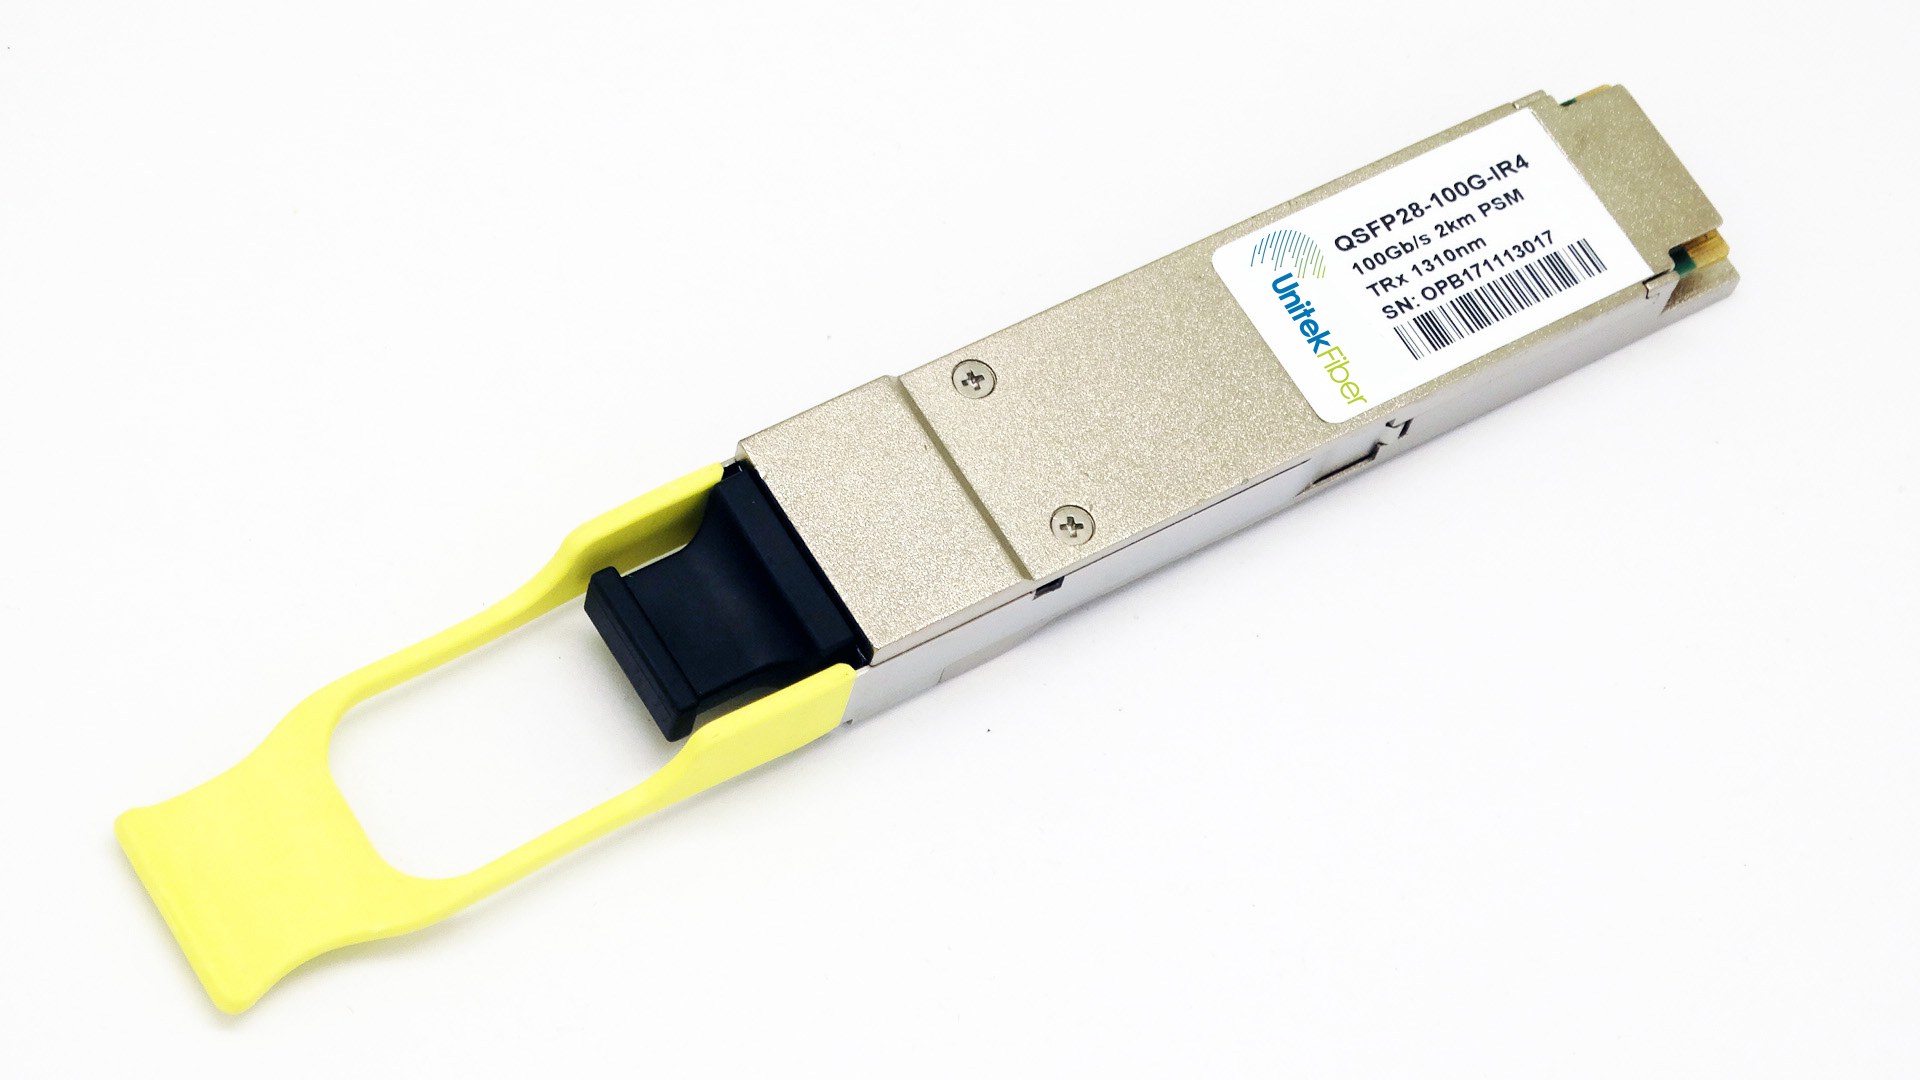 Application of  QSFP28 100G Optical Module in 100G Ethernet and Infiniband